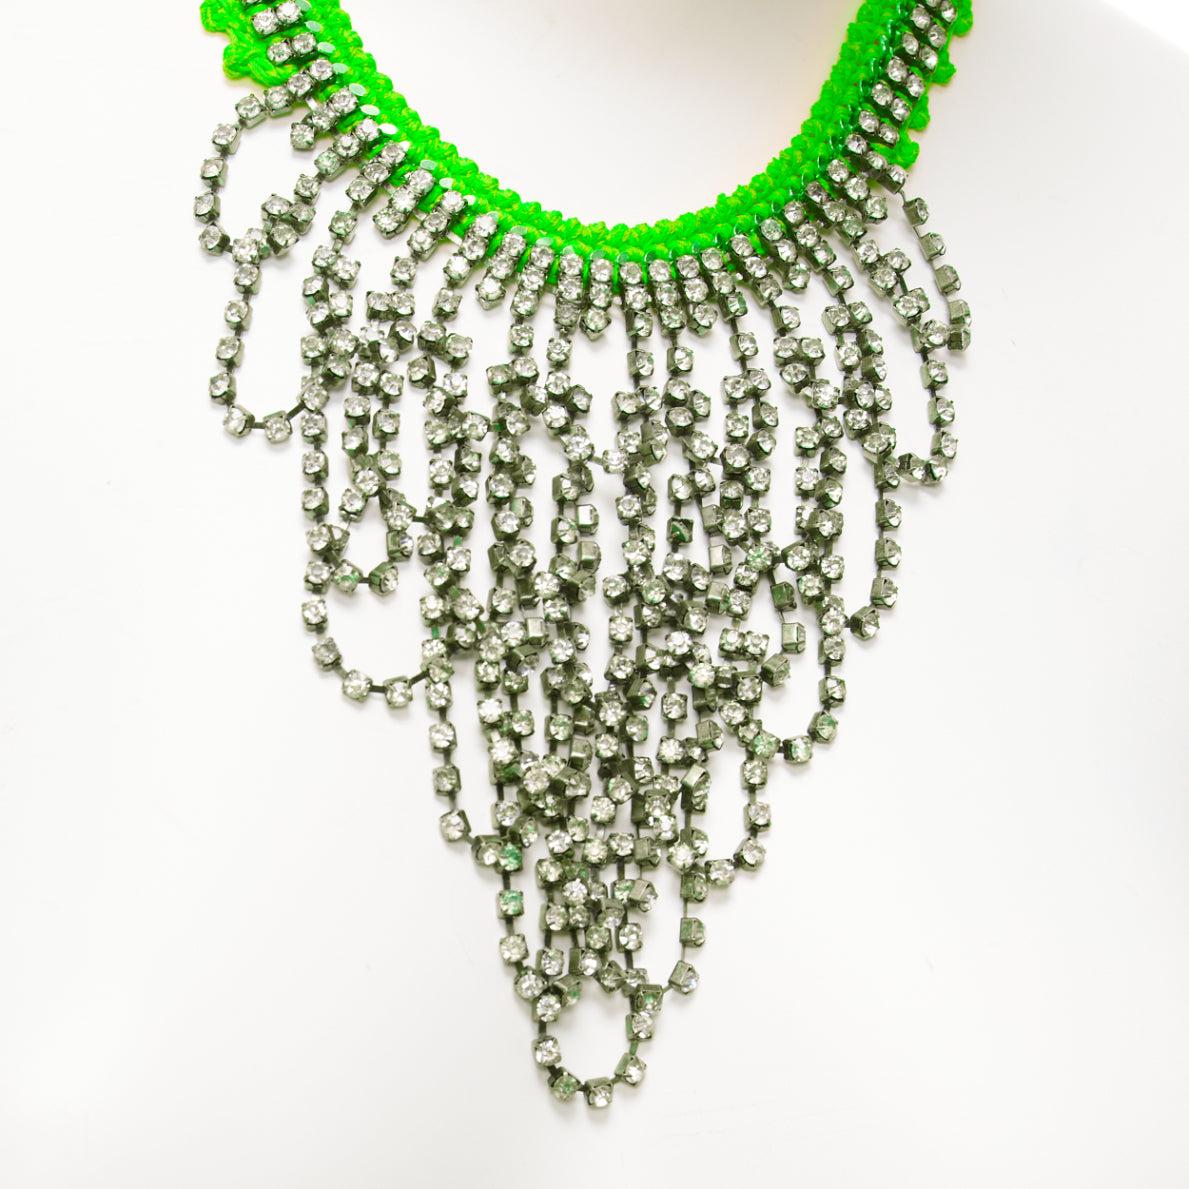 VANESSA ARIZAGA neon green rope clear crystal chandelier short necklace For Sale 2